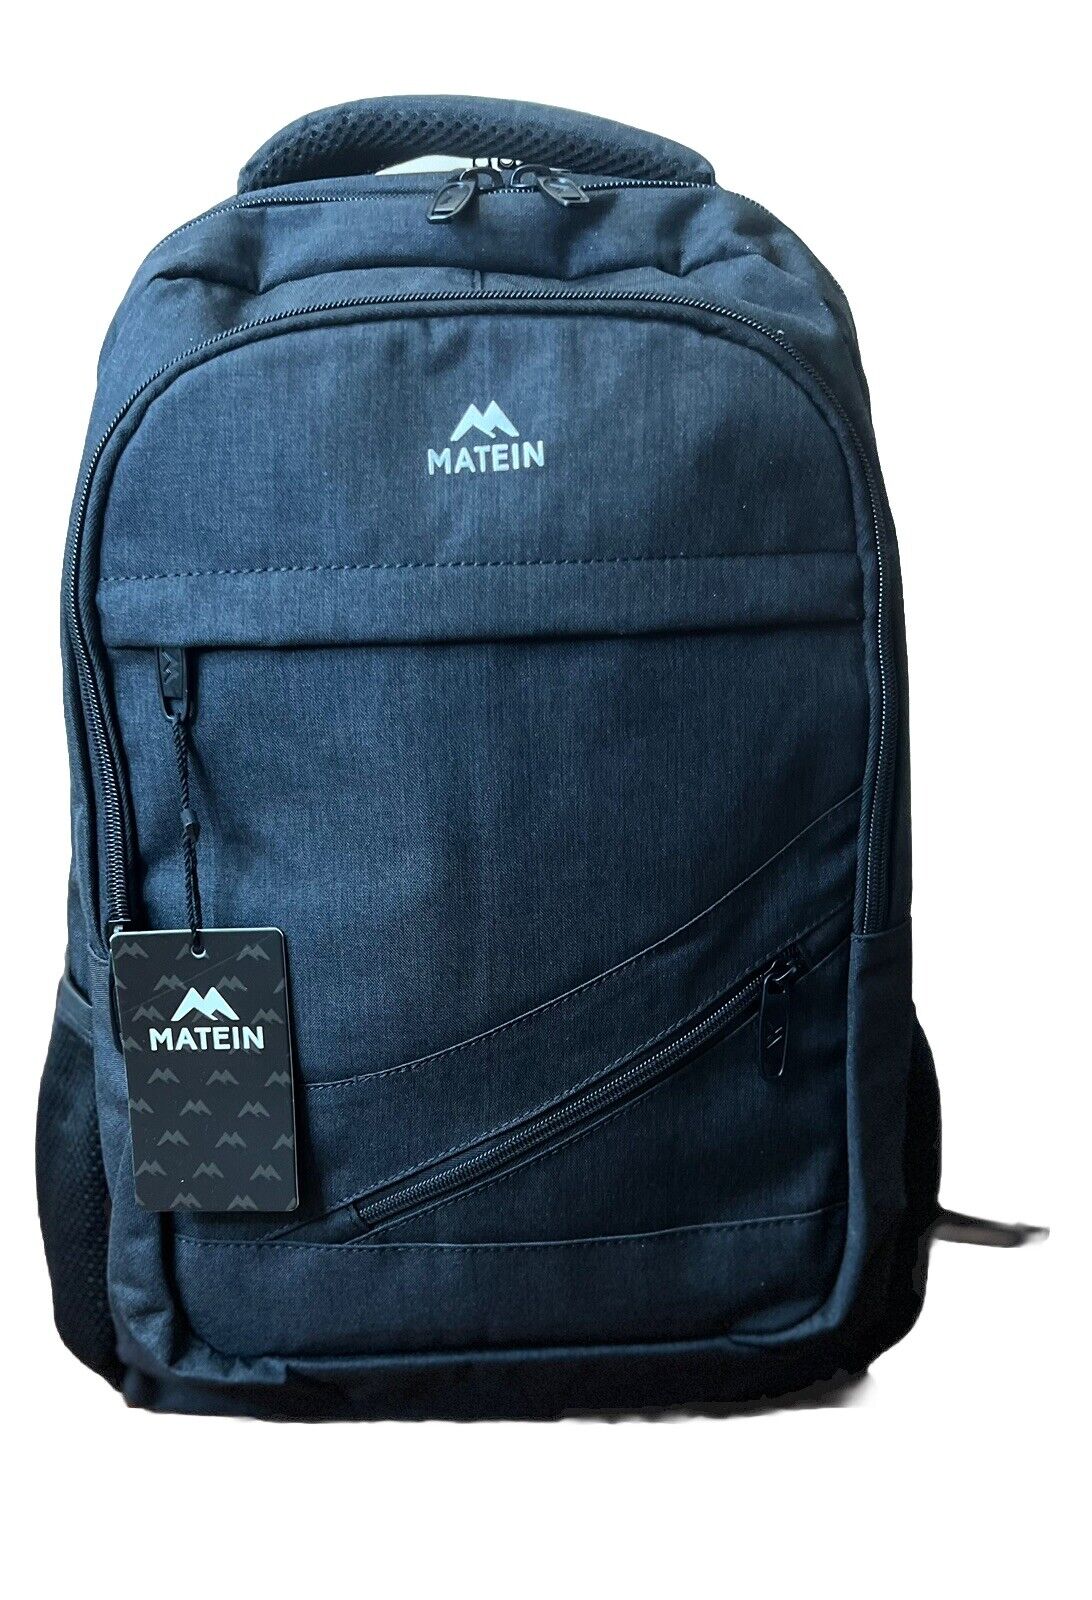 matein travel laptop backpack